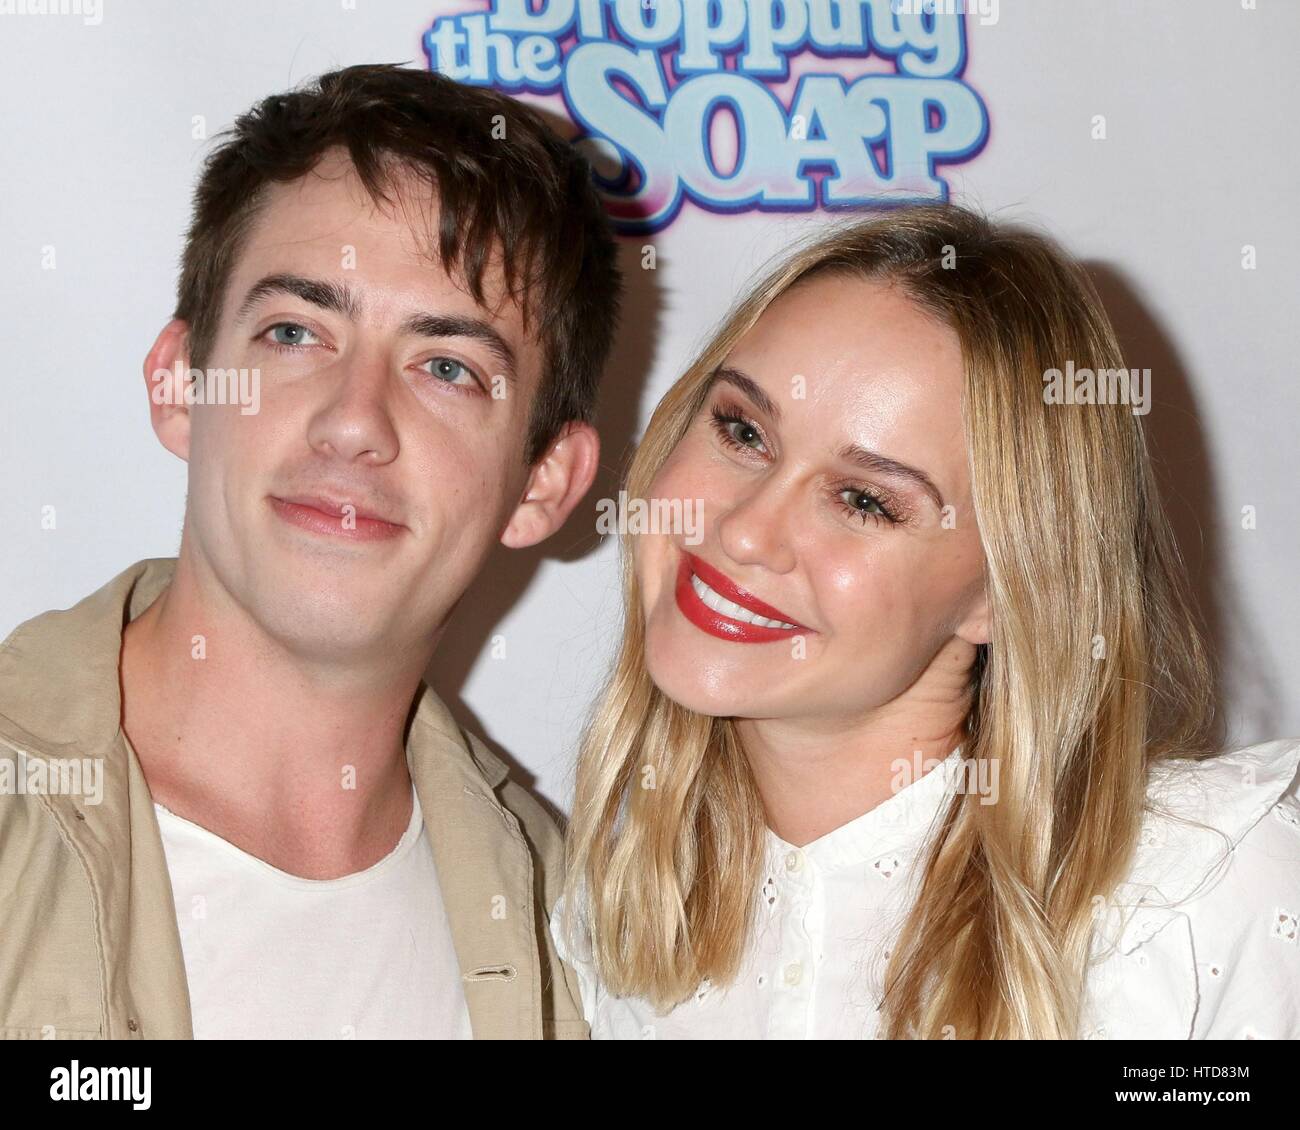 Beverly Hills, CA. 7th Mar, 2017. Kevin McHale, Becca Tobin at arrivals for DROPPING THE SOAP Premiere, Writers Guild Theater, Beverly Hills, CA March 7, 2017. Credit: Priscilla Grant/Everett Collection/Alamy Live News Stock Photo